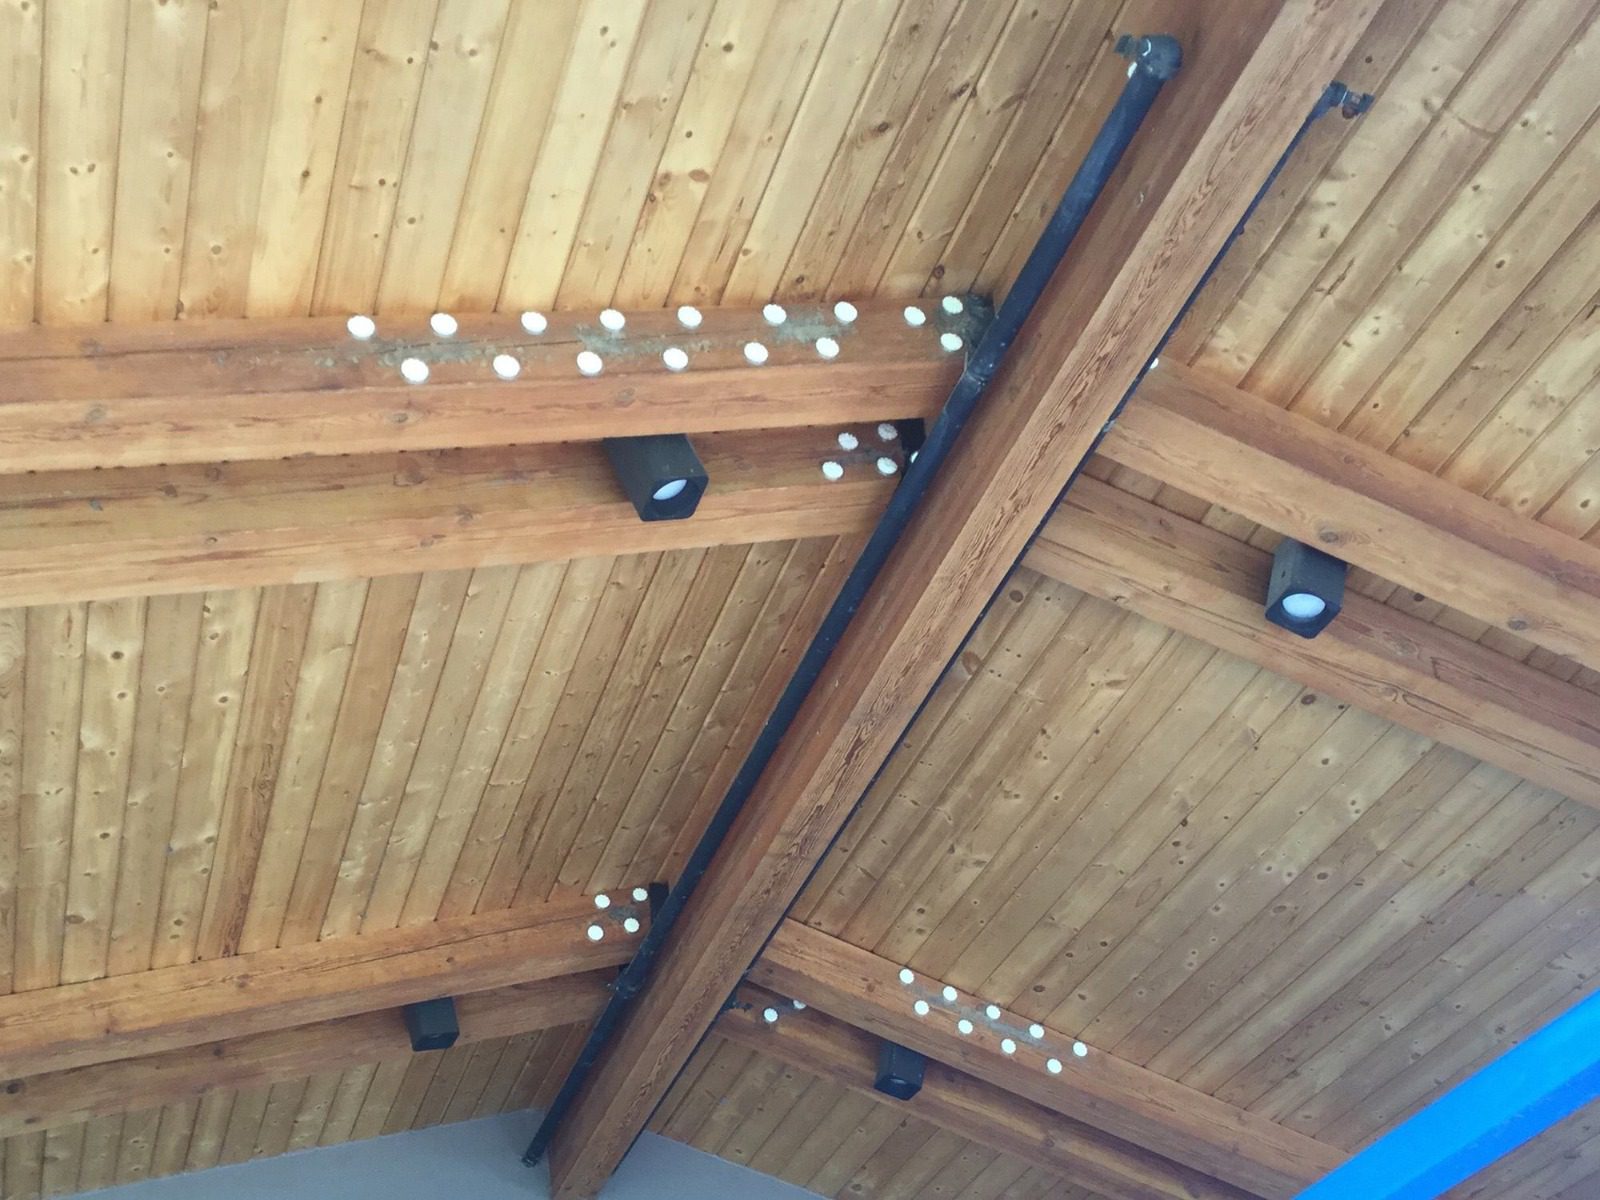 optical gel on wood ceiling for mud swallows